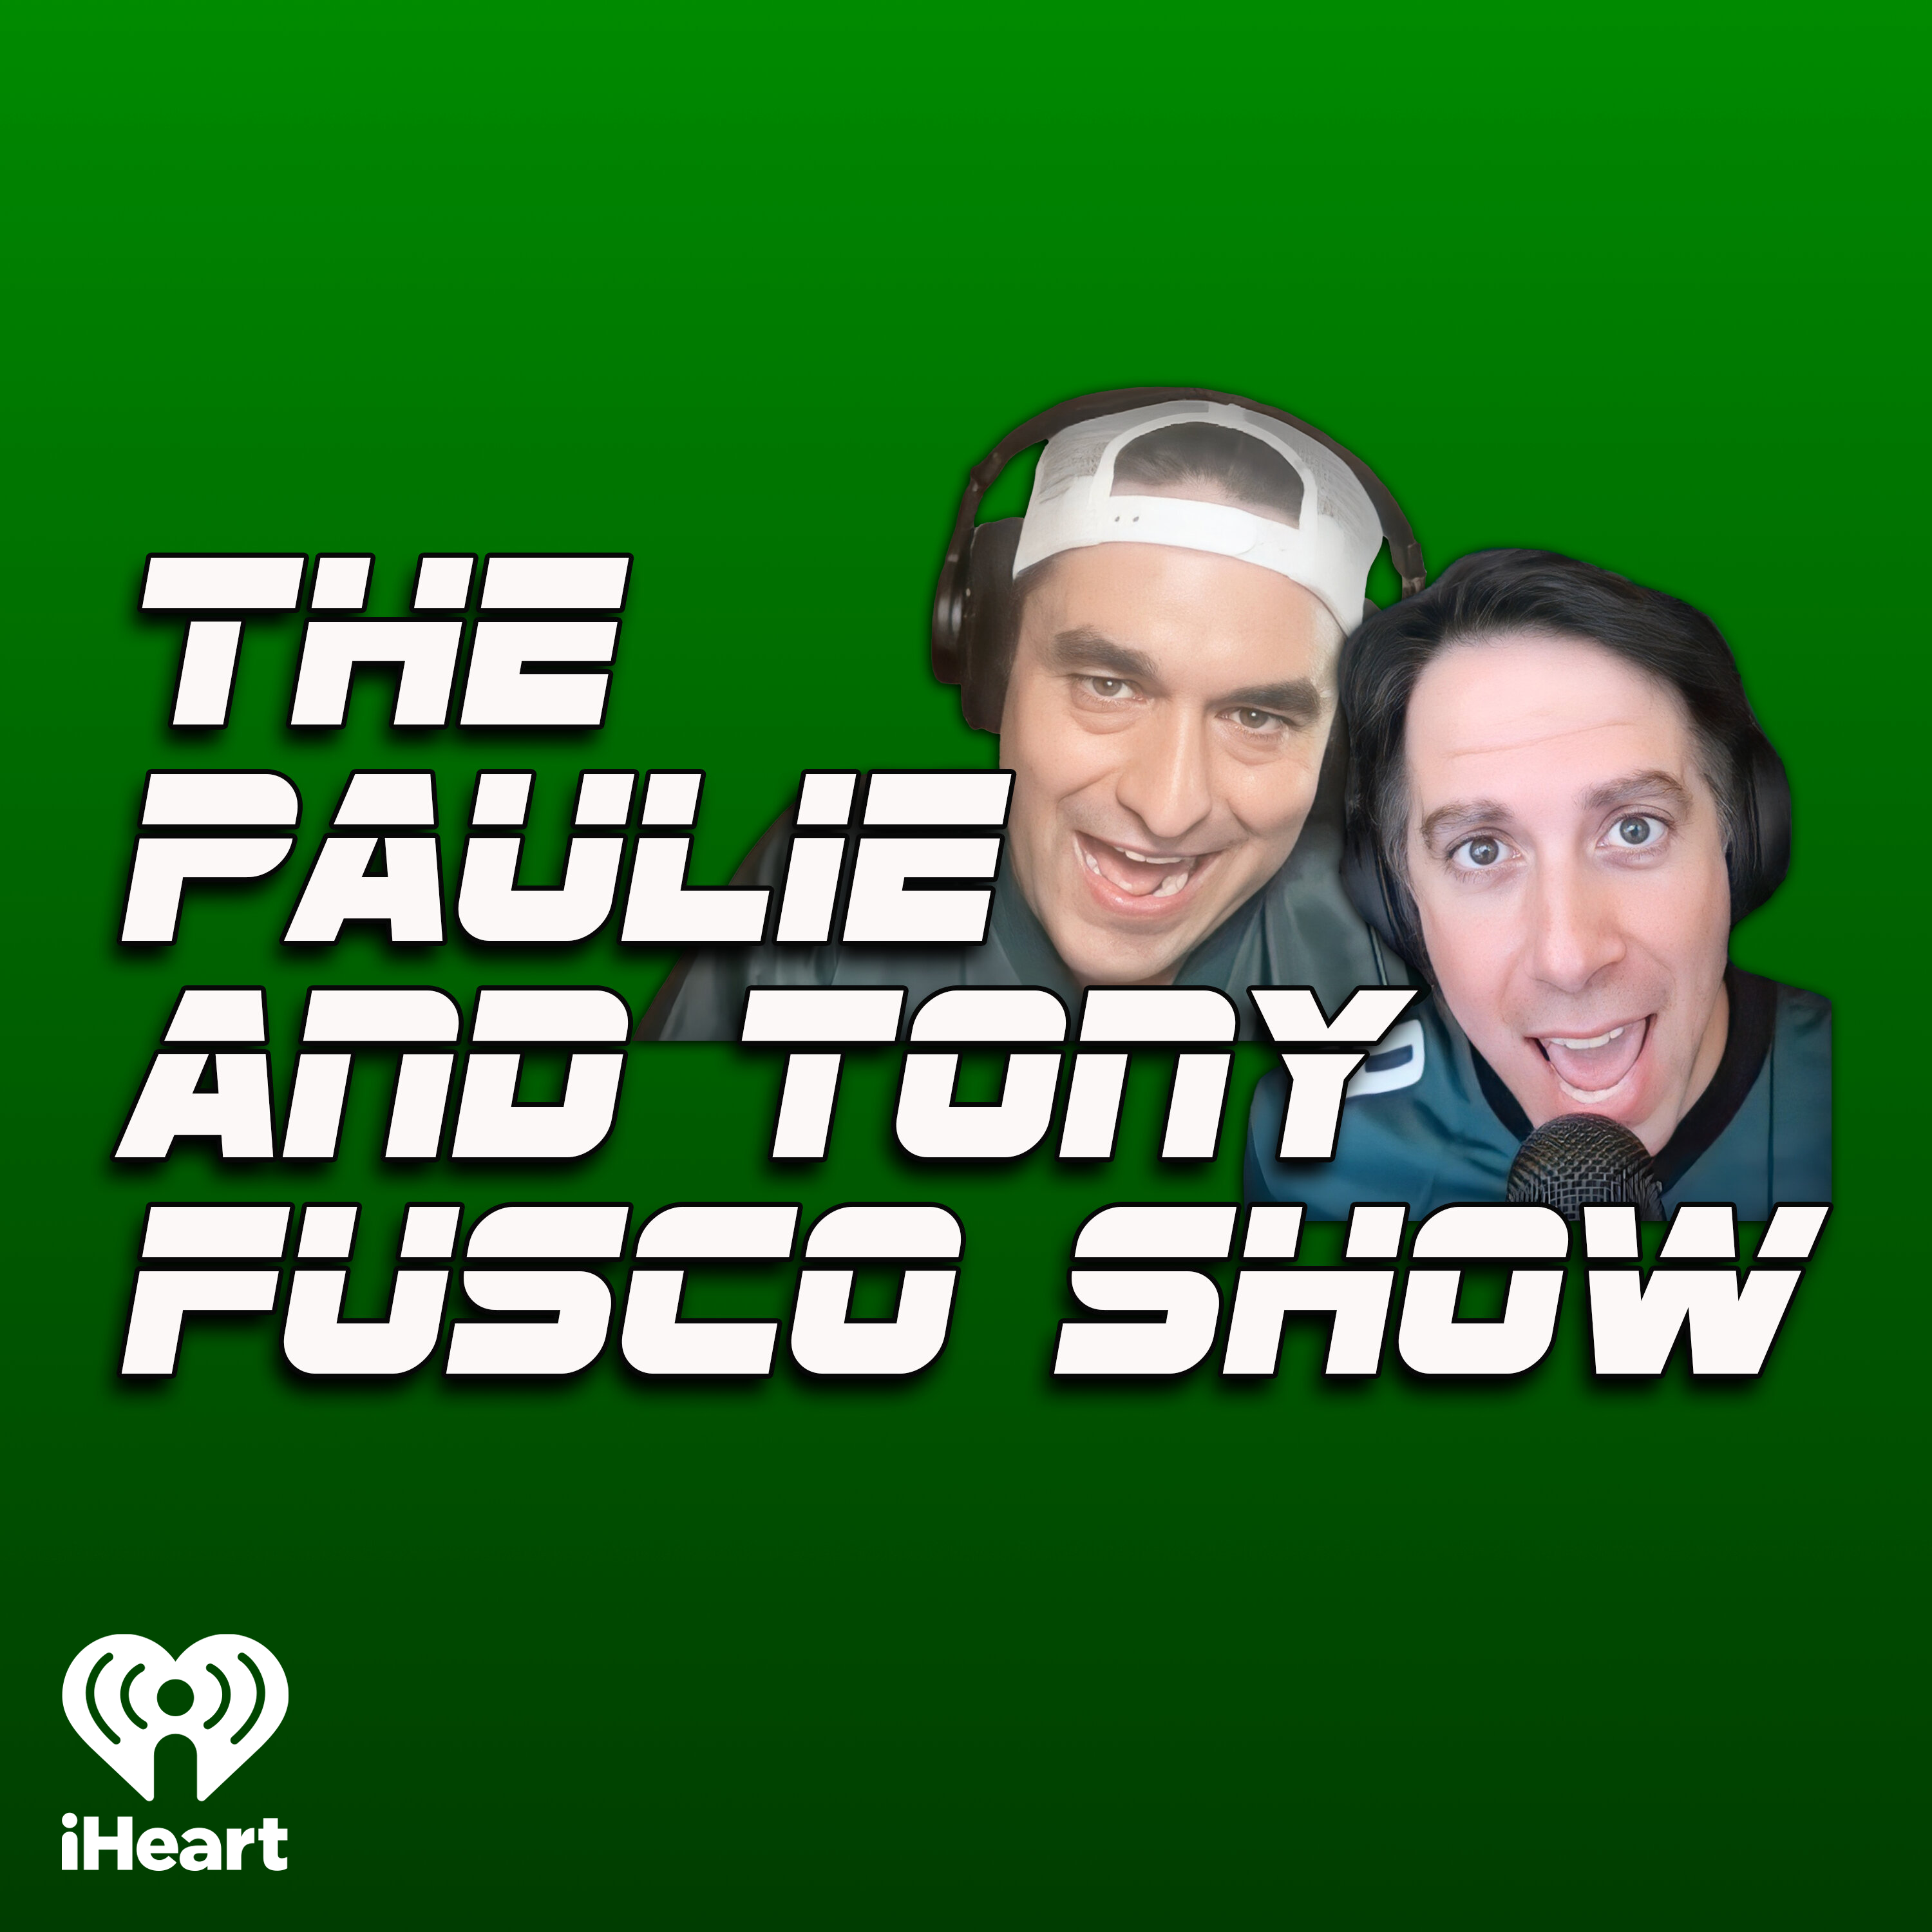 The Paulie & Tony Fusco Show: Joy Taylor REFUSES to admit NFL is rigged despite 100% CLEAR evidence